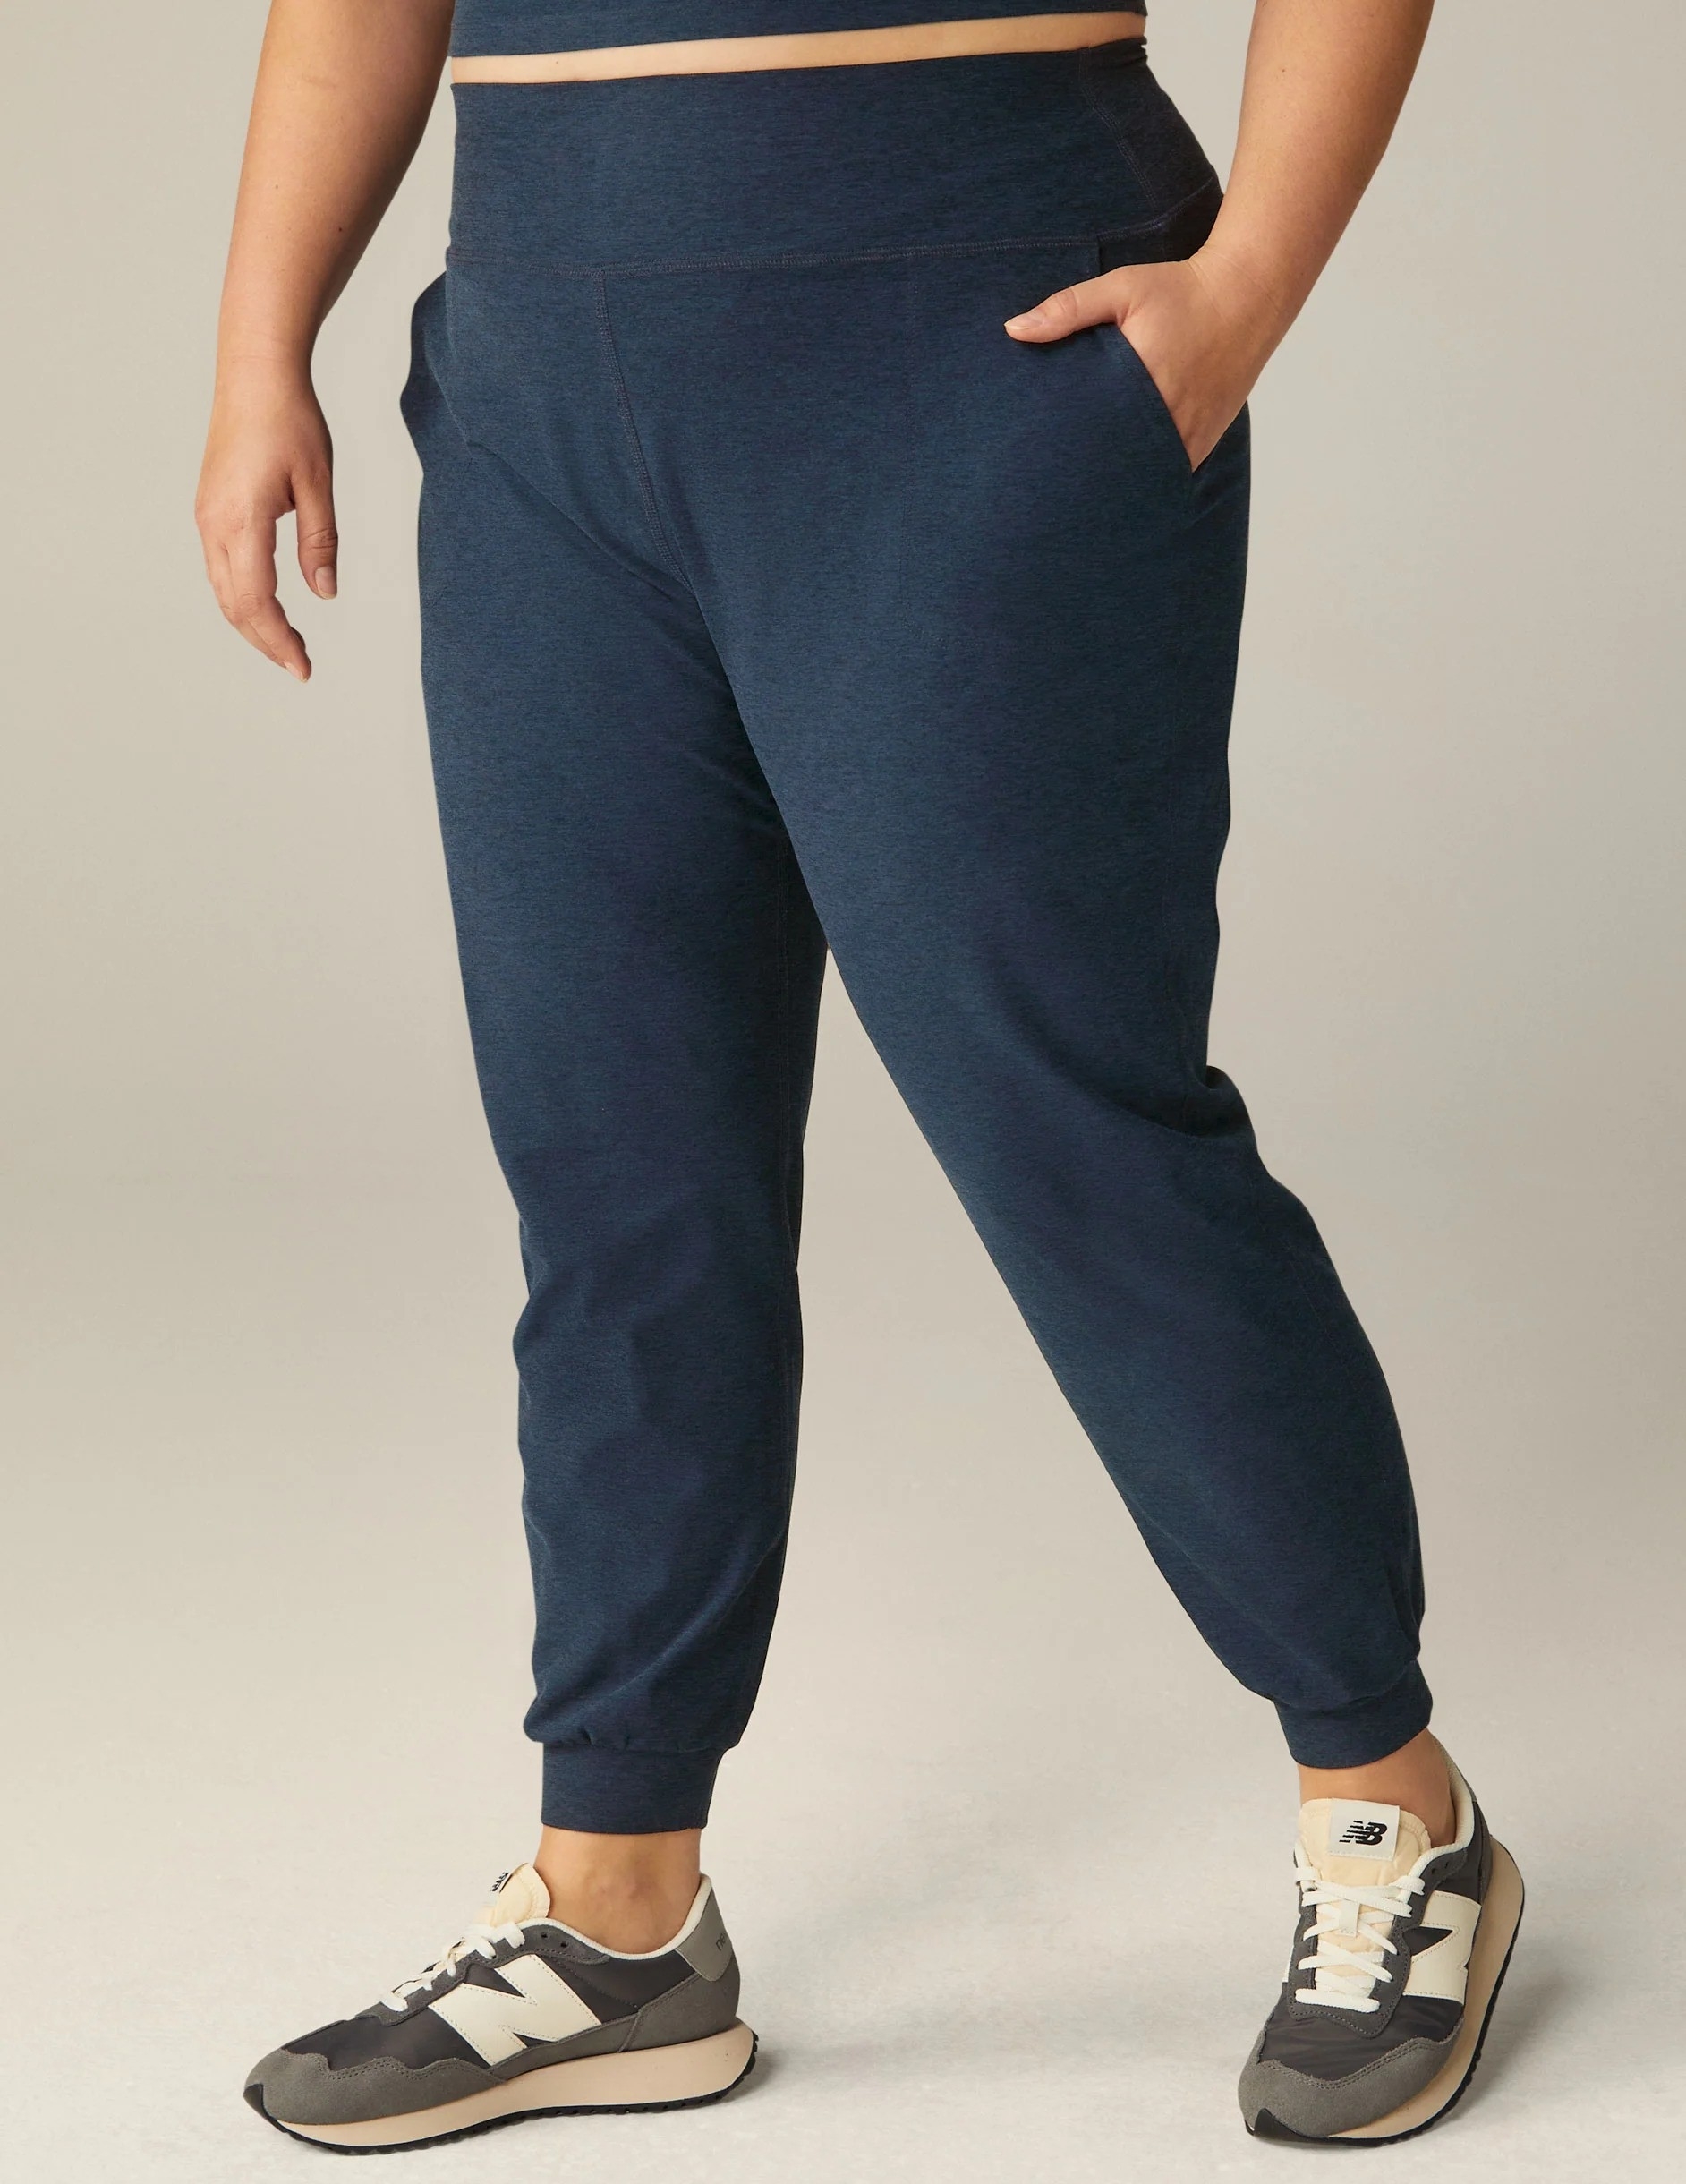 A person standing, wearing navy blue joggers and multicolored sneakers, focus on the lower half of the body